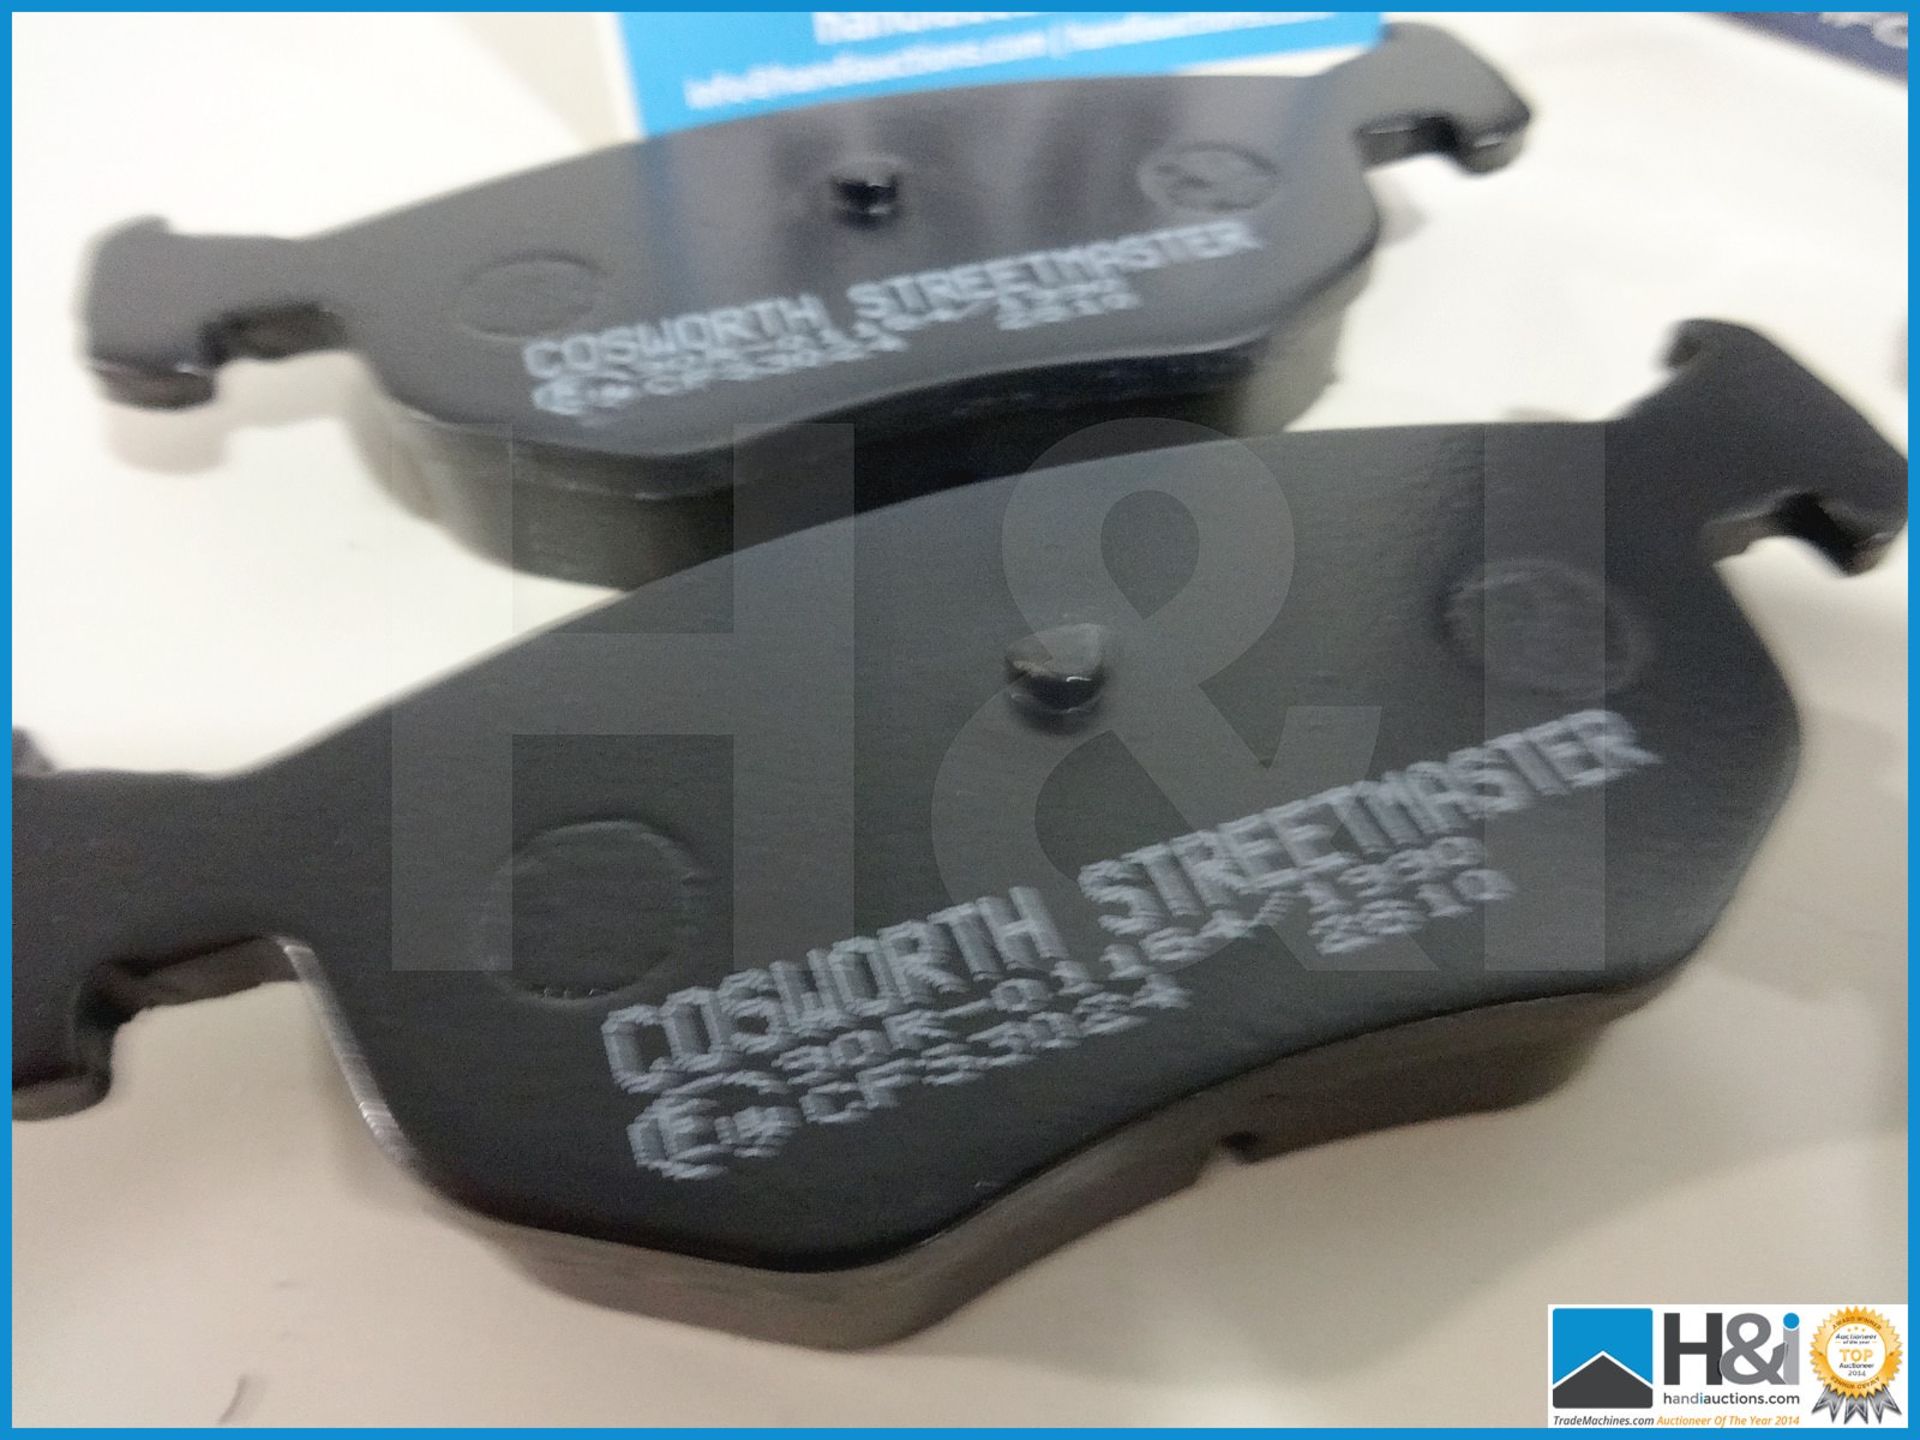 10 off Escort Cosworth 4WD 92-95 front brake pads. New and boxed. MC: CFS3024 CILN: 14 - Image 2 of 3